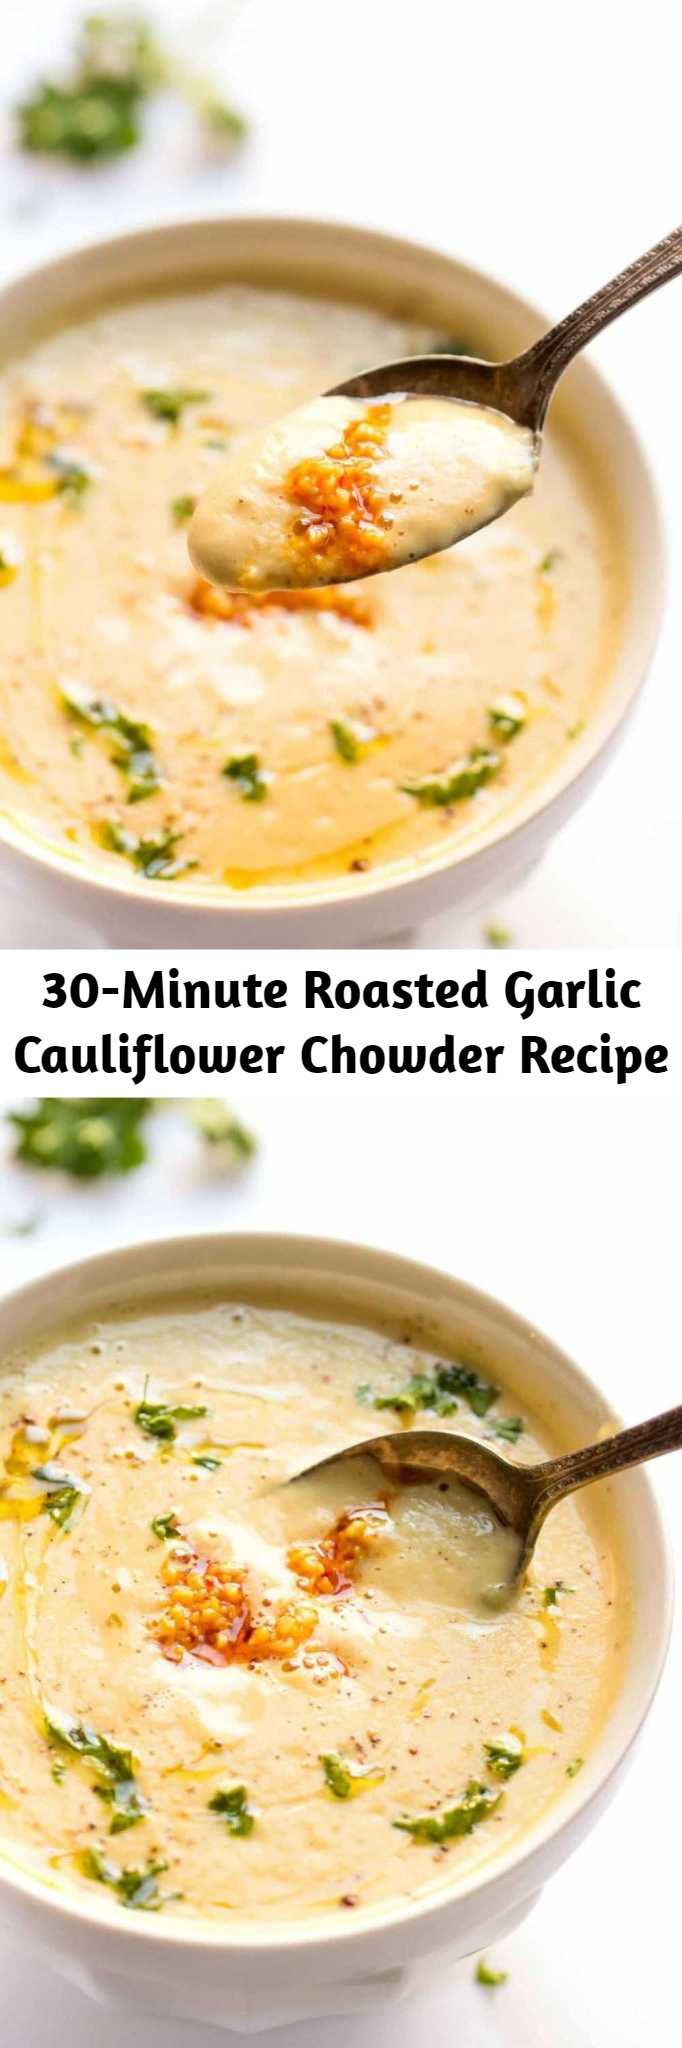 30-Minute Roasted Garlic Cauliflower Chowder Recipe - This quick cauliflower chowder is made in only 30 minutes, is filled with roasted garlic flavors and it's high in protein so it's satisfying and healthy! [gluten-free + vegan]